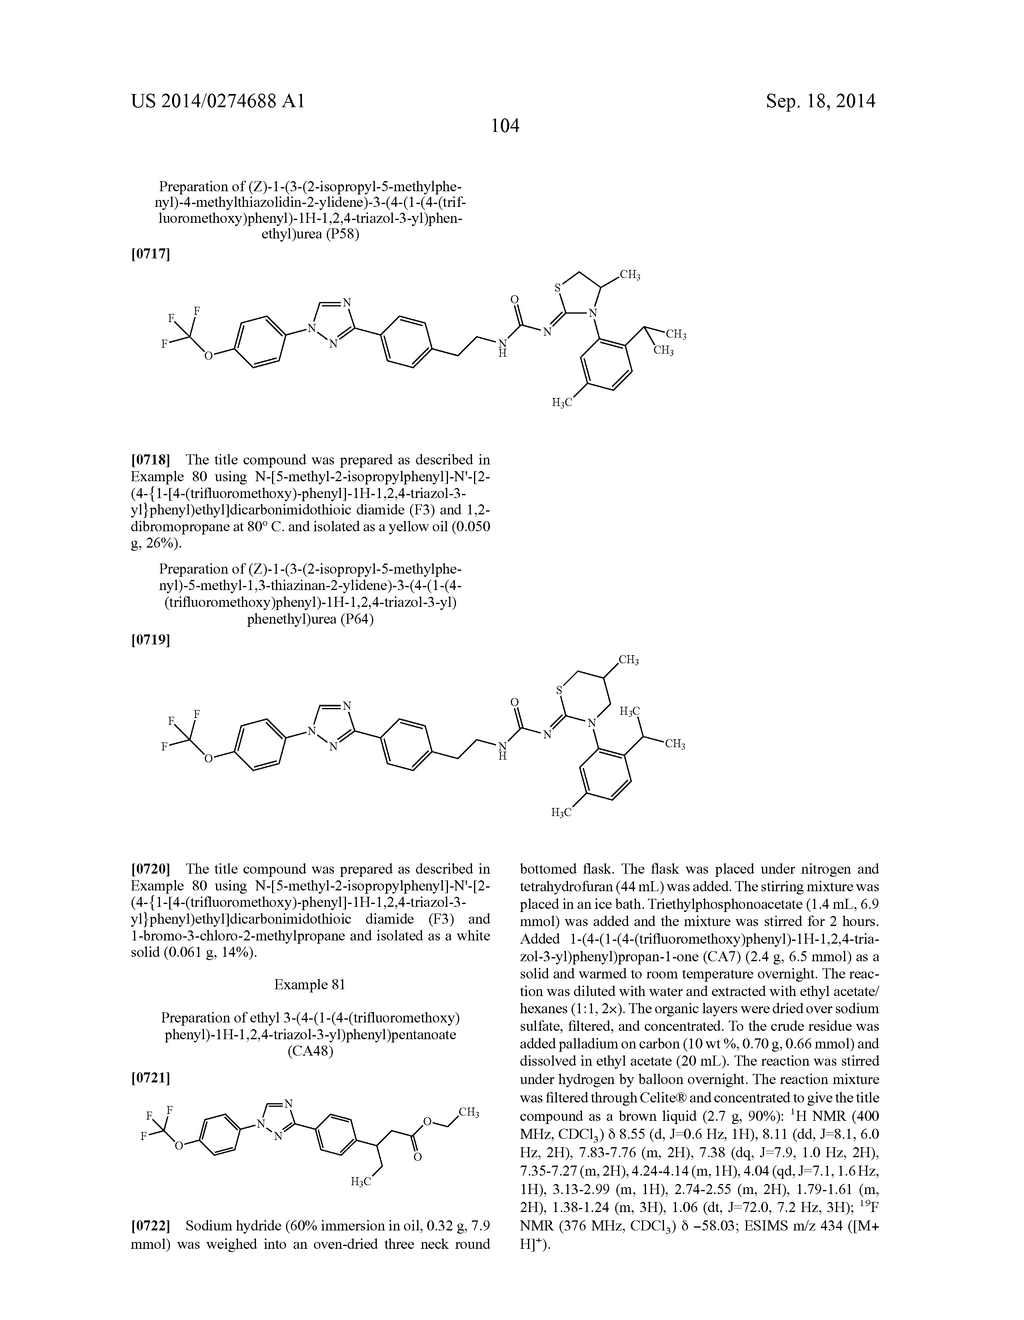 MOLECULES HAVING CERTAIN PESTICIDAL UTILITIES, AND INTERMEDIATES,     COMPOSITIONS, AND PROCESSES RELATED THERETO - diagram, schematic, and image 105